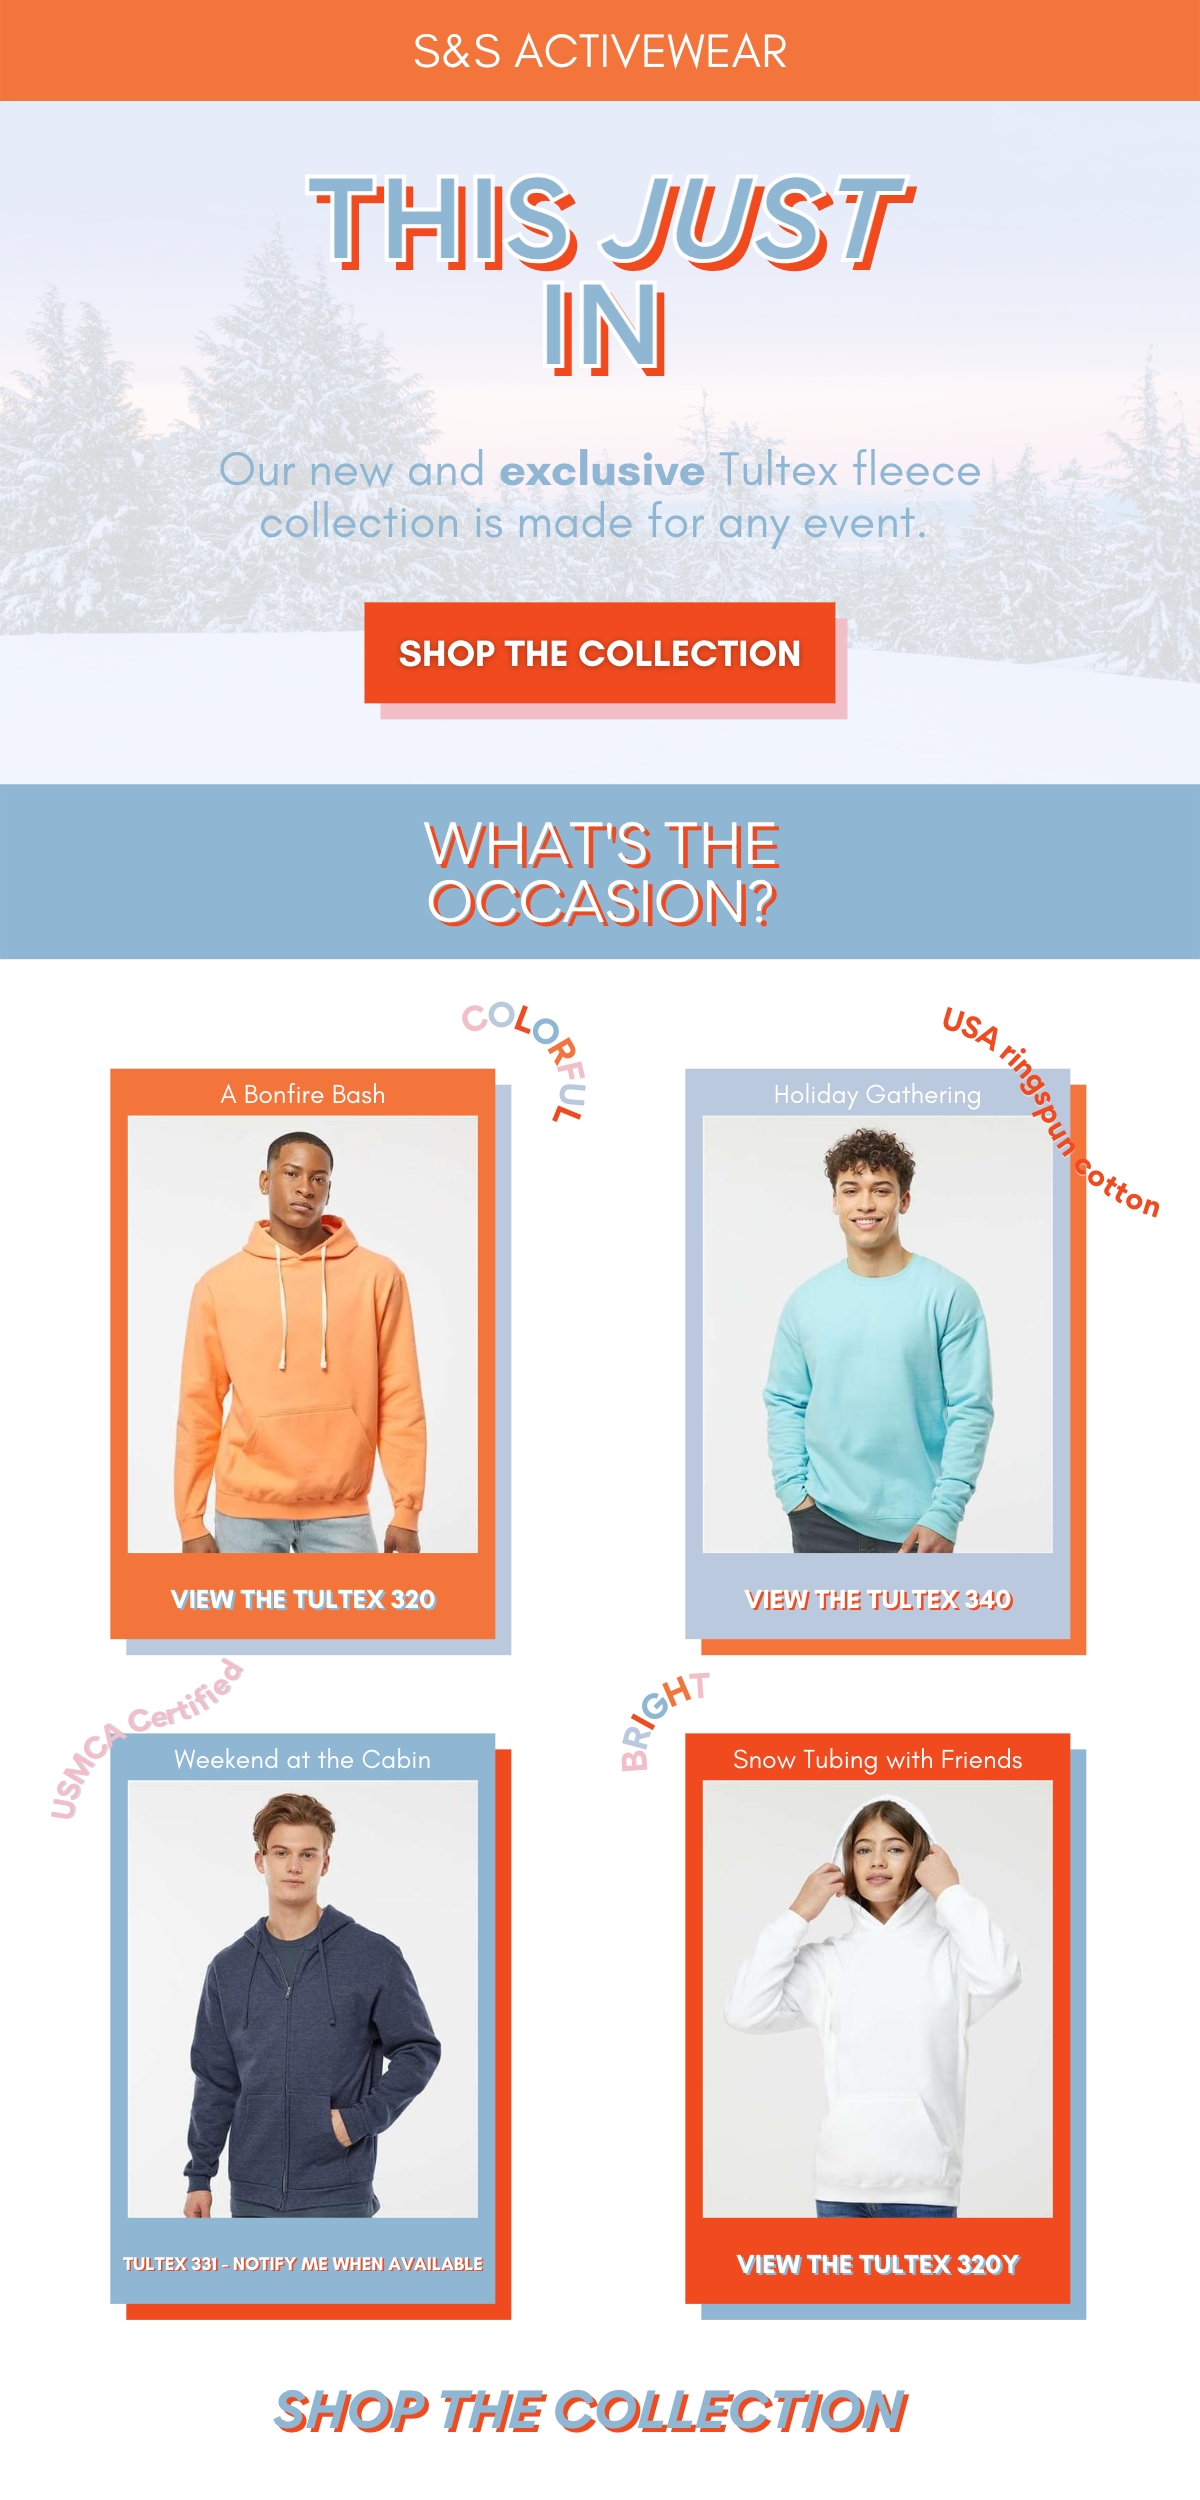 S&S Activewear Email Campaign